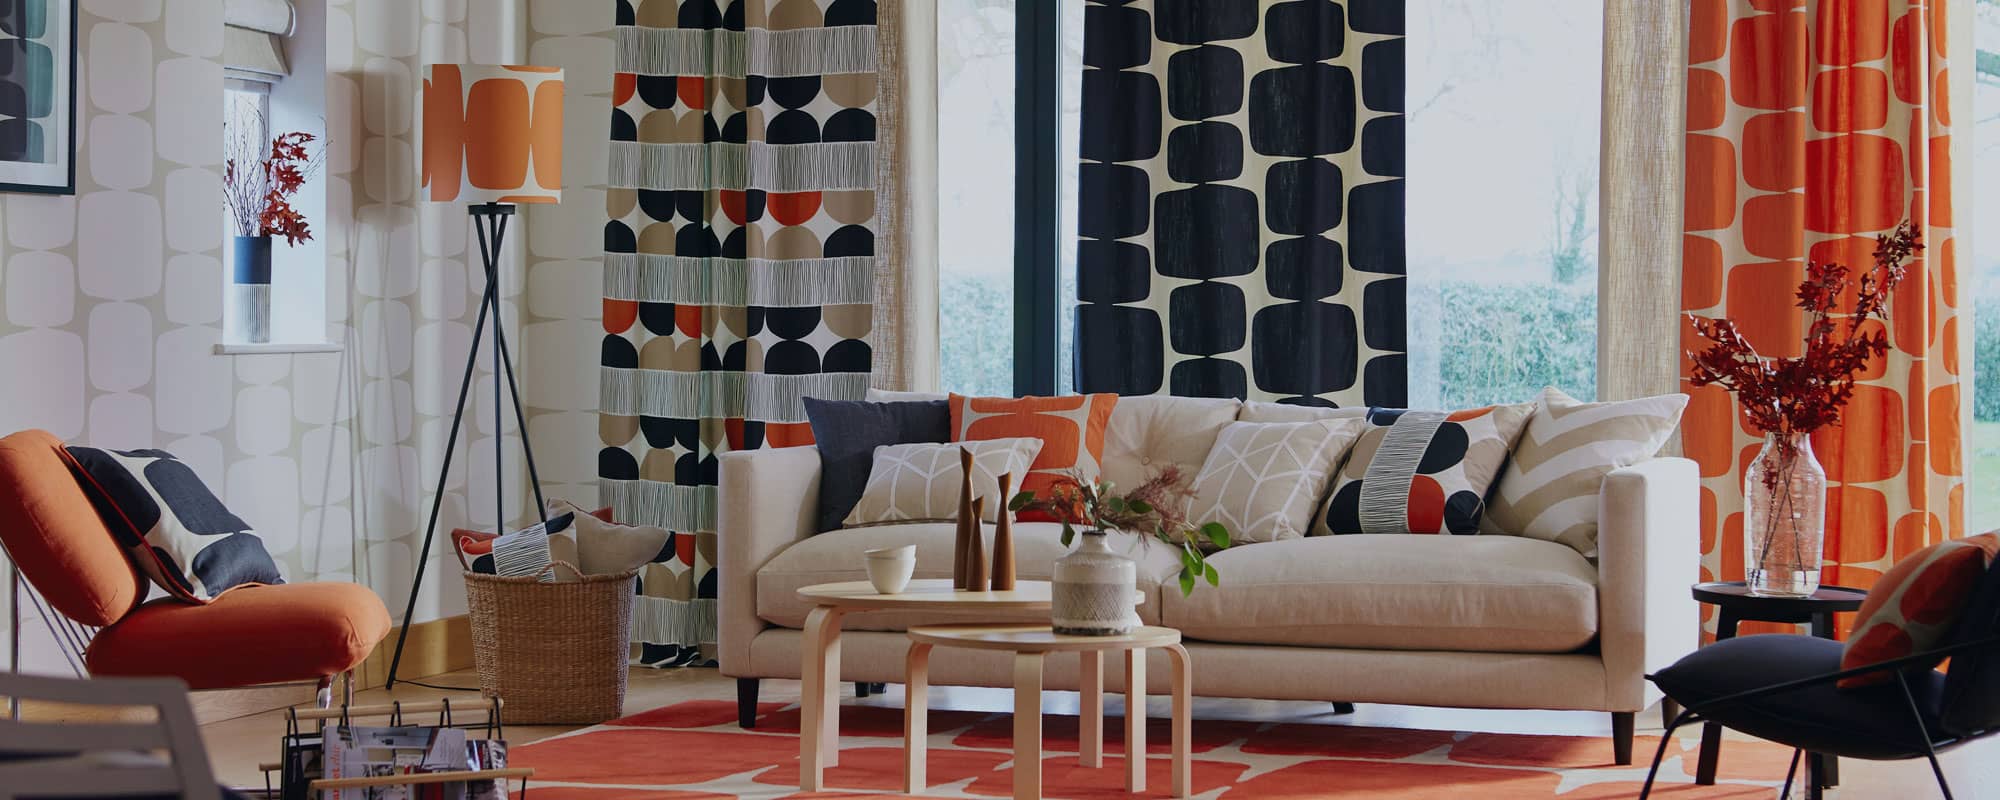 Modern living room sofa and curtains